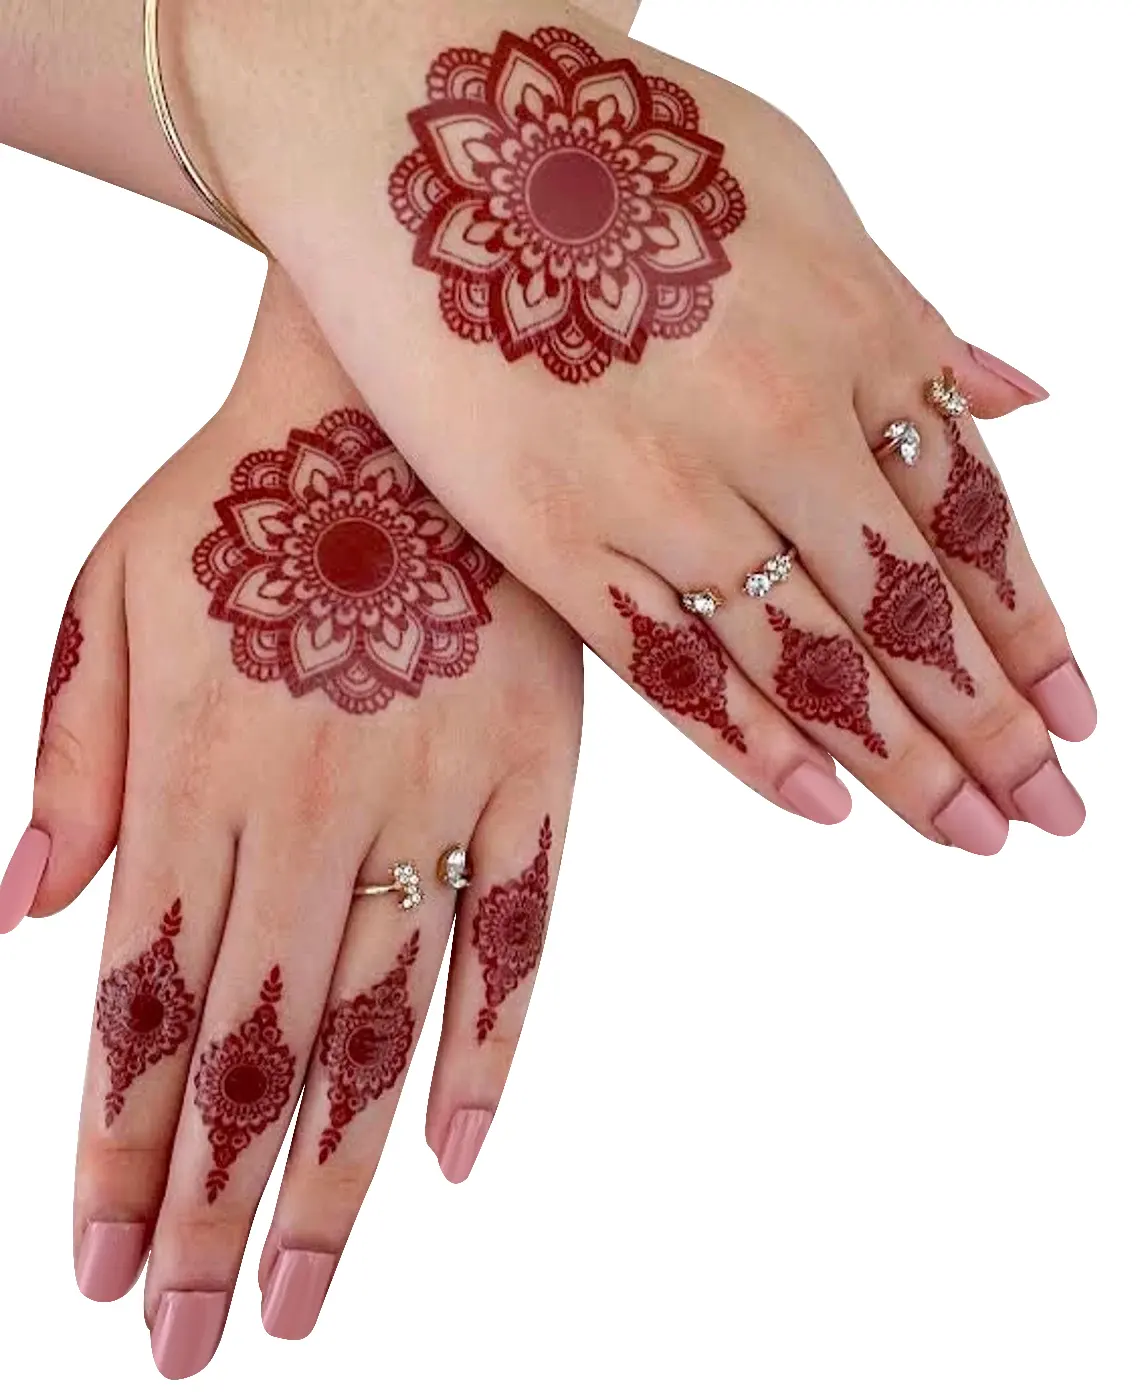 Snelle Levering Henna Tattoo Stickers Tattoo Stickers Tijdelijke Henna Sticker Tattoo Stencils